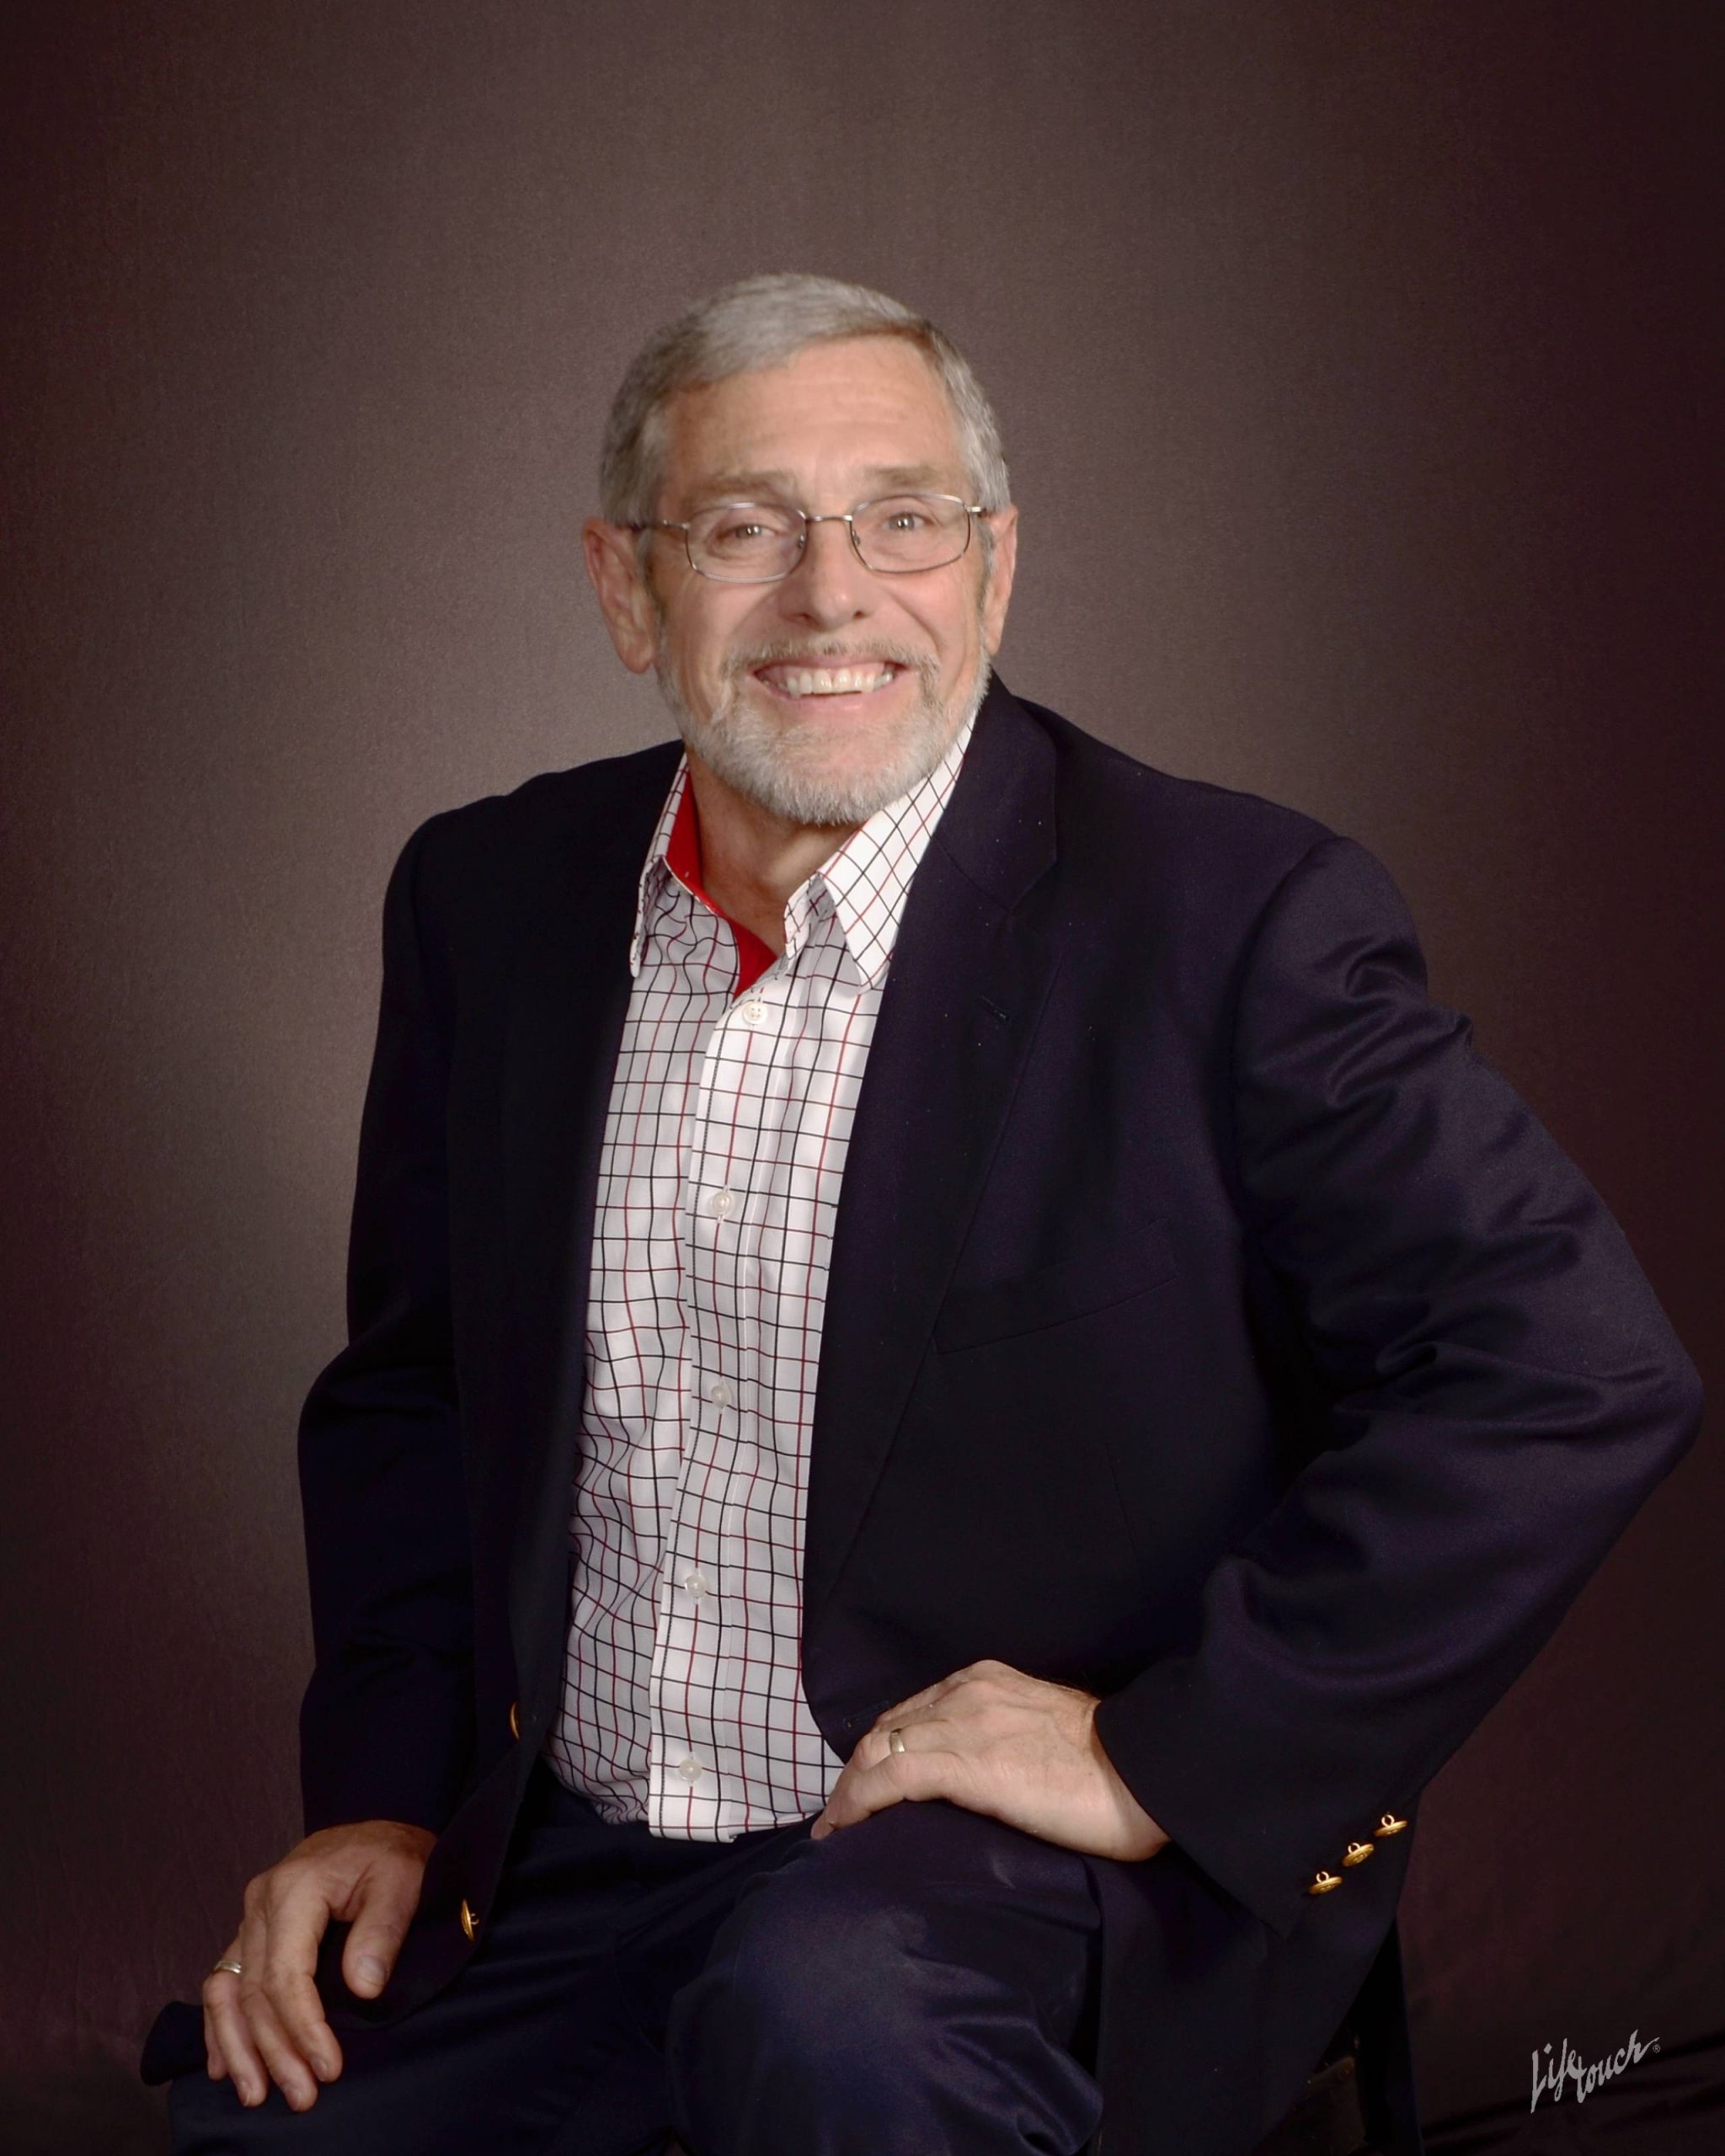 older white man with gray hair, wearing a white checkered shirt with a dark sportcoat, posing in a studio